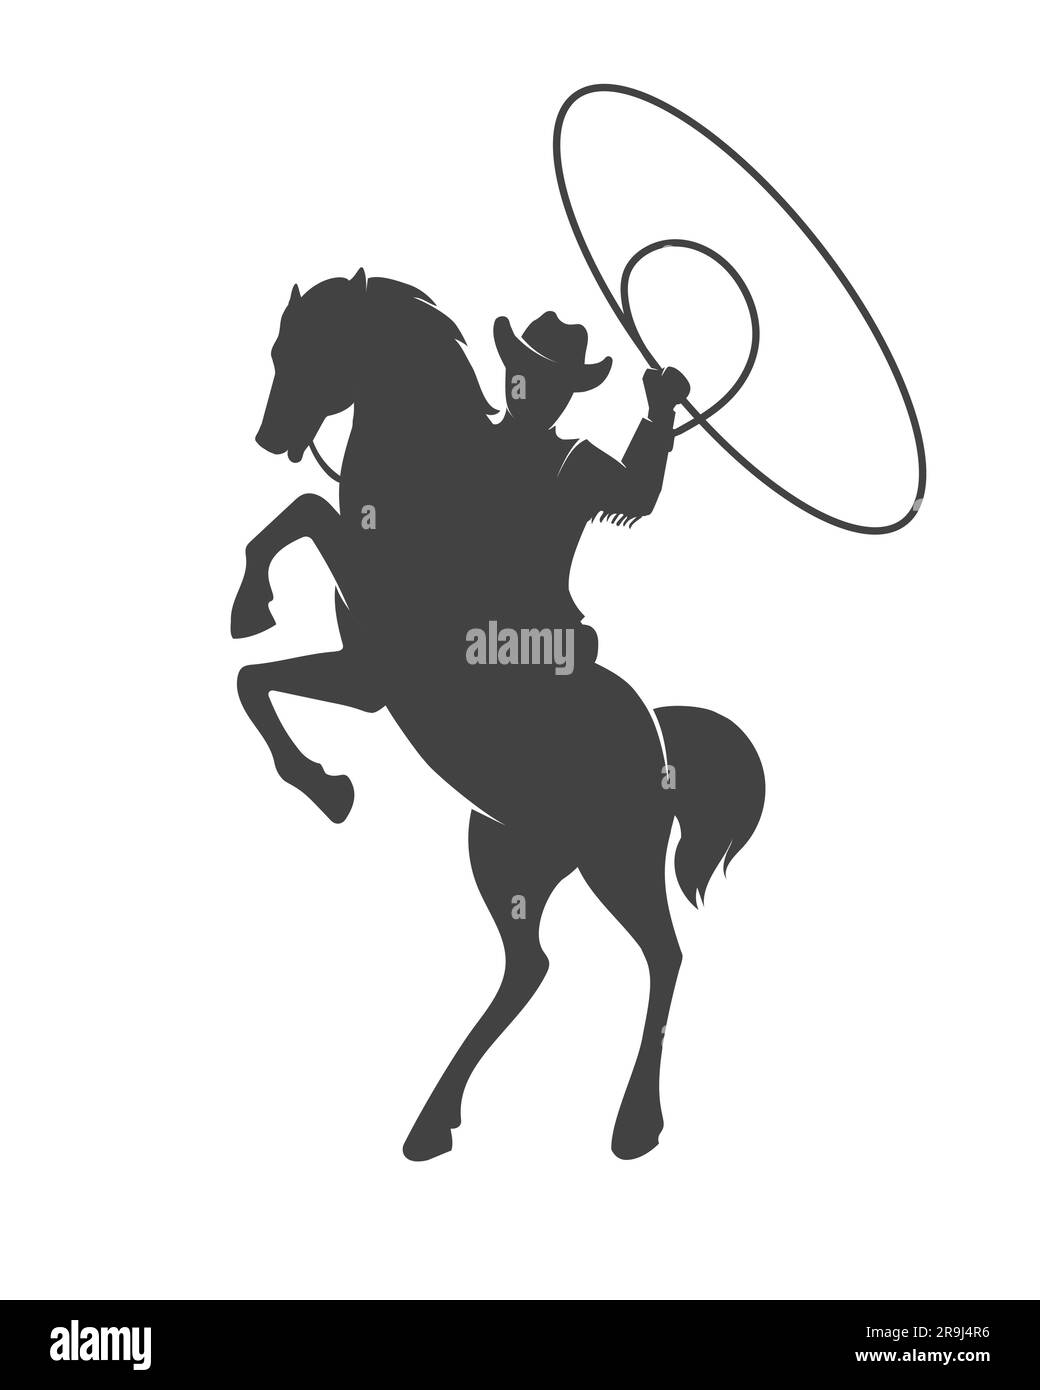 Cowboy on Horse with Lasso Silhouette Monochrome Emblem isolated on ...